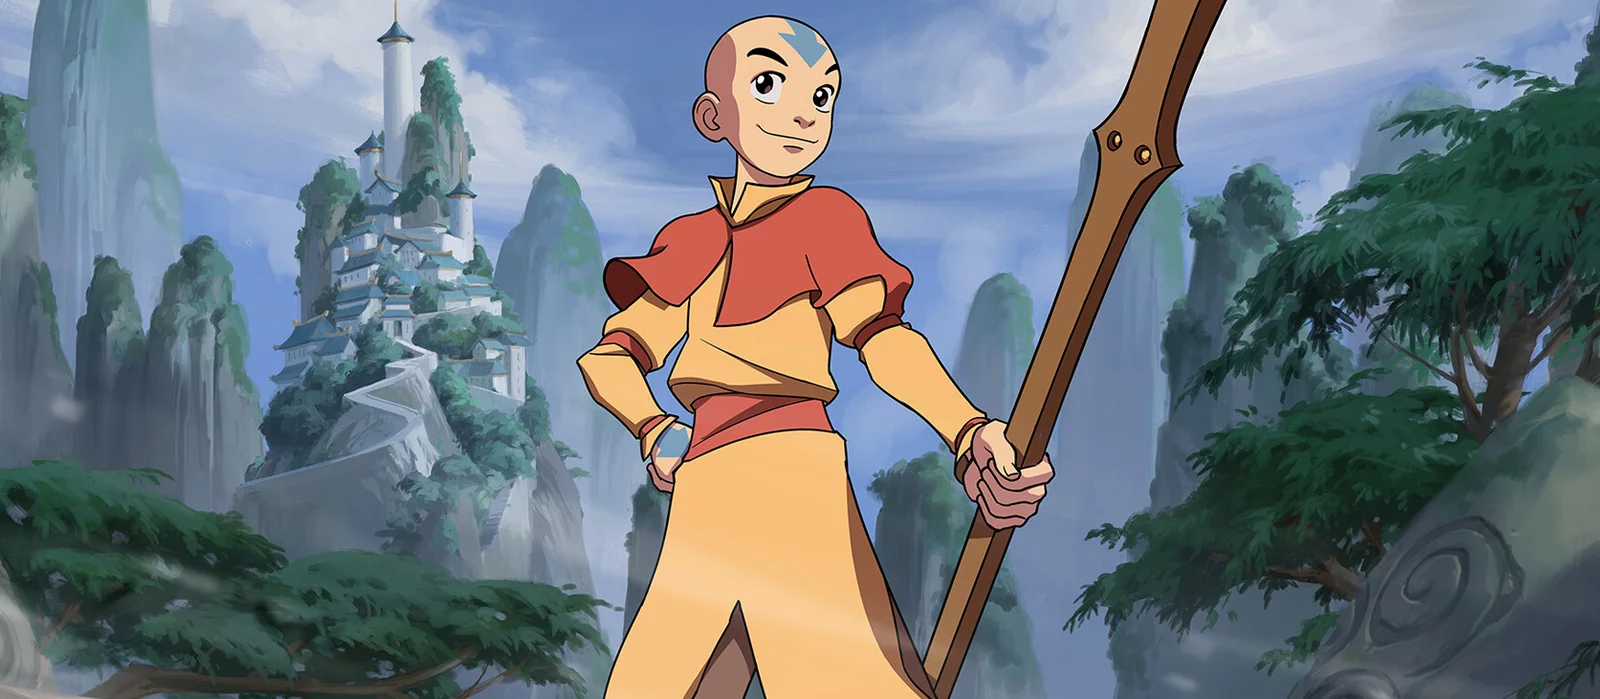 Avatar the last airbender in english. Аанг. Аватара аанг. Avtar Ank.